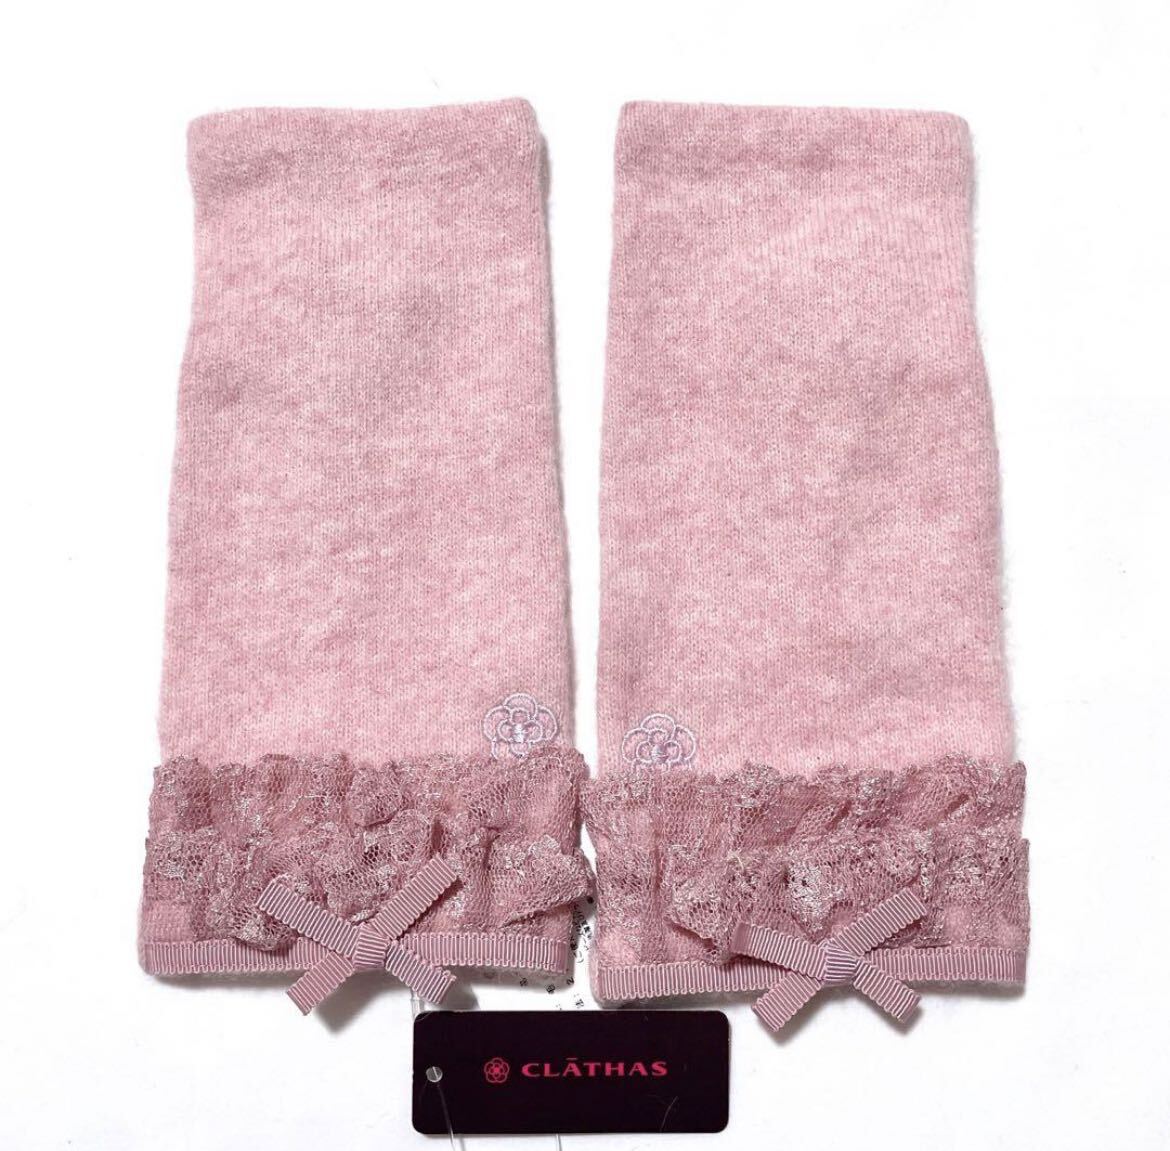 y10 new goods [ CLATHAS Clathas ] lady's finger none gloves arm cover short mitten pink finger less smartphone operation finger .. gloves 